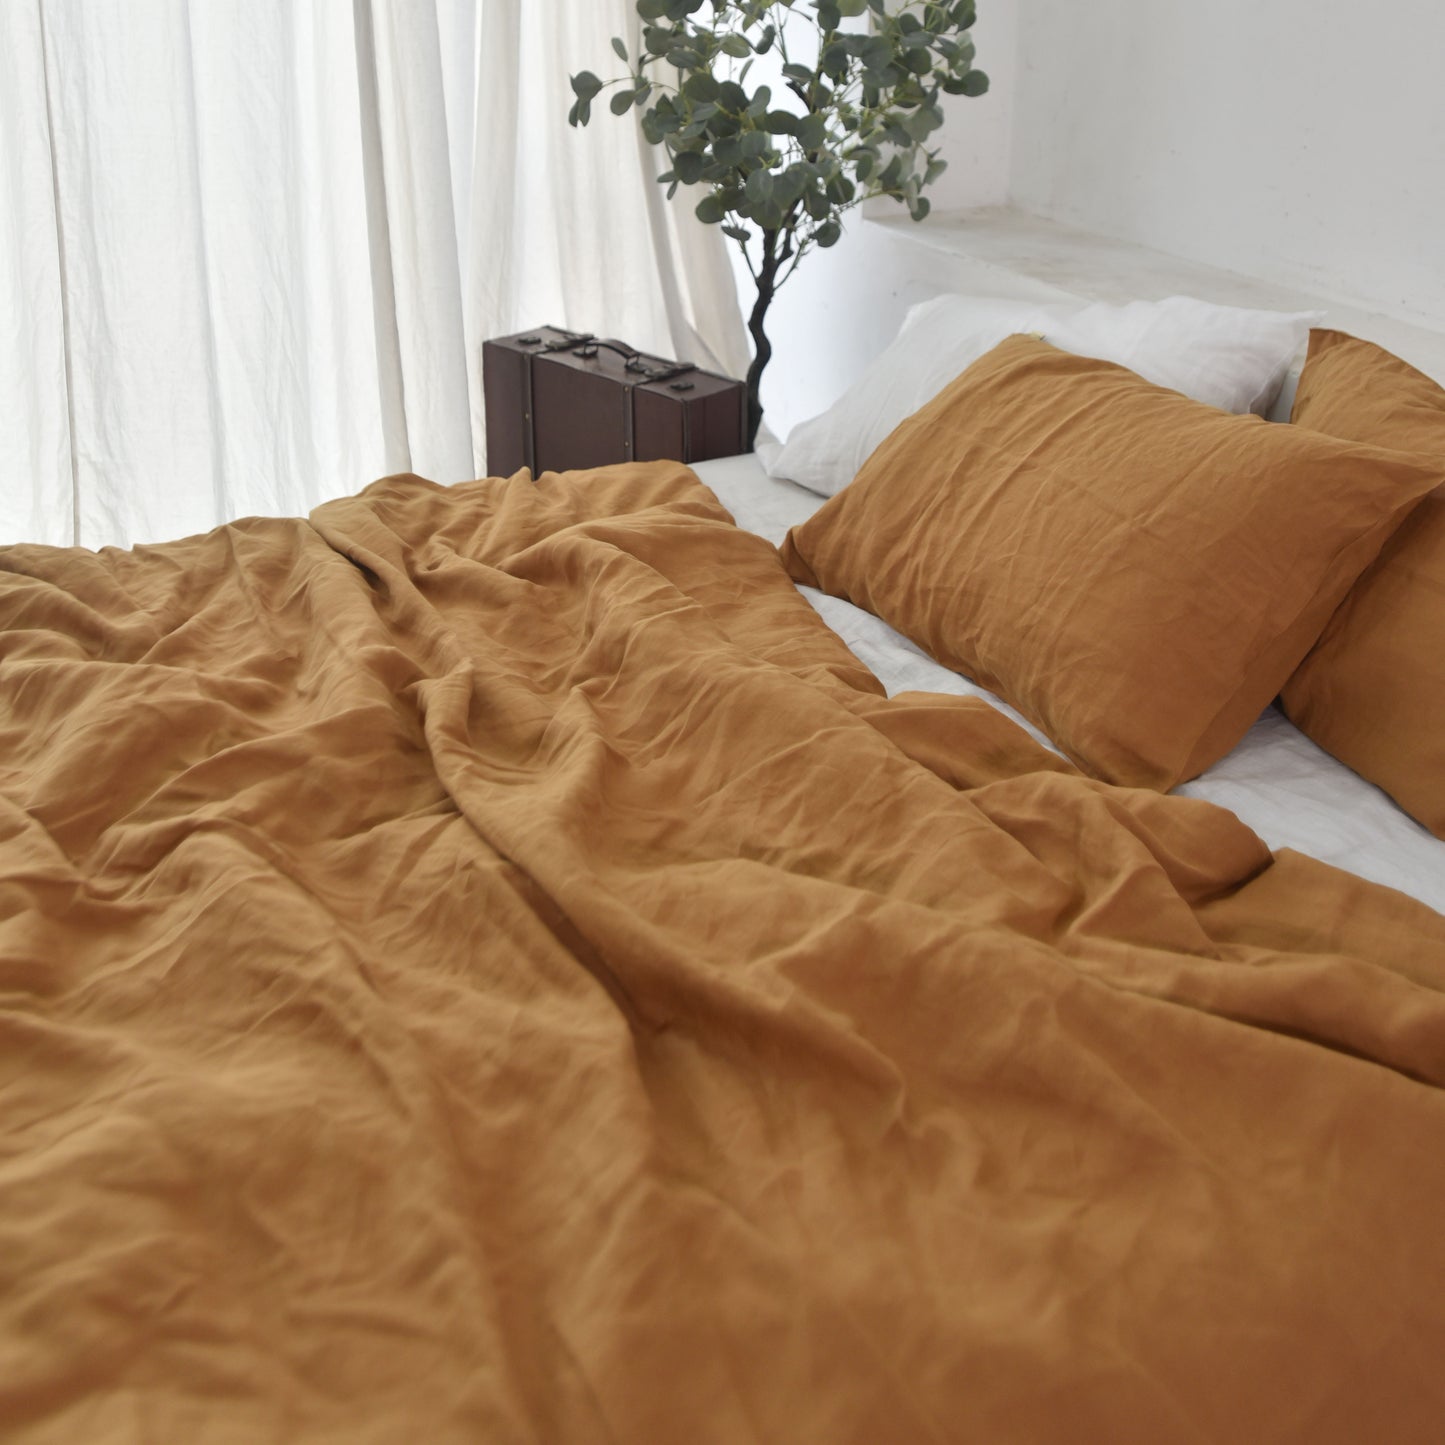 Goldenrod French Linen Bedding Sets (4 pieces) - Plain Dyeing